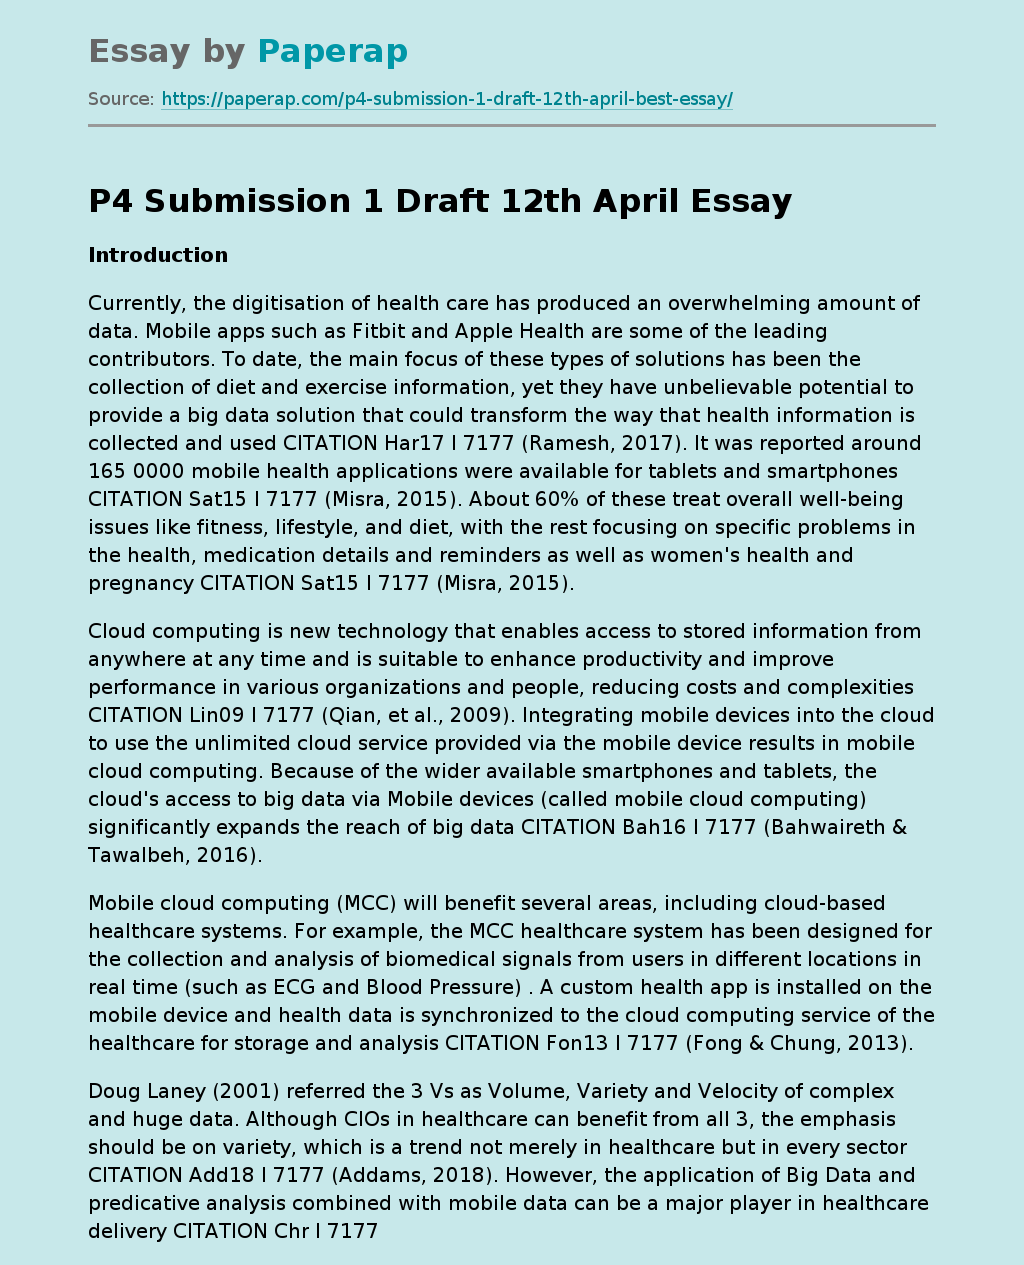 P4 Submission 1 Draft 12th April